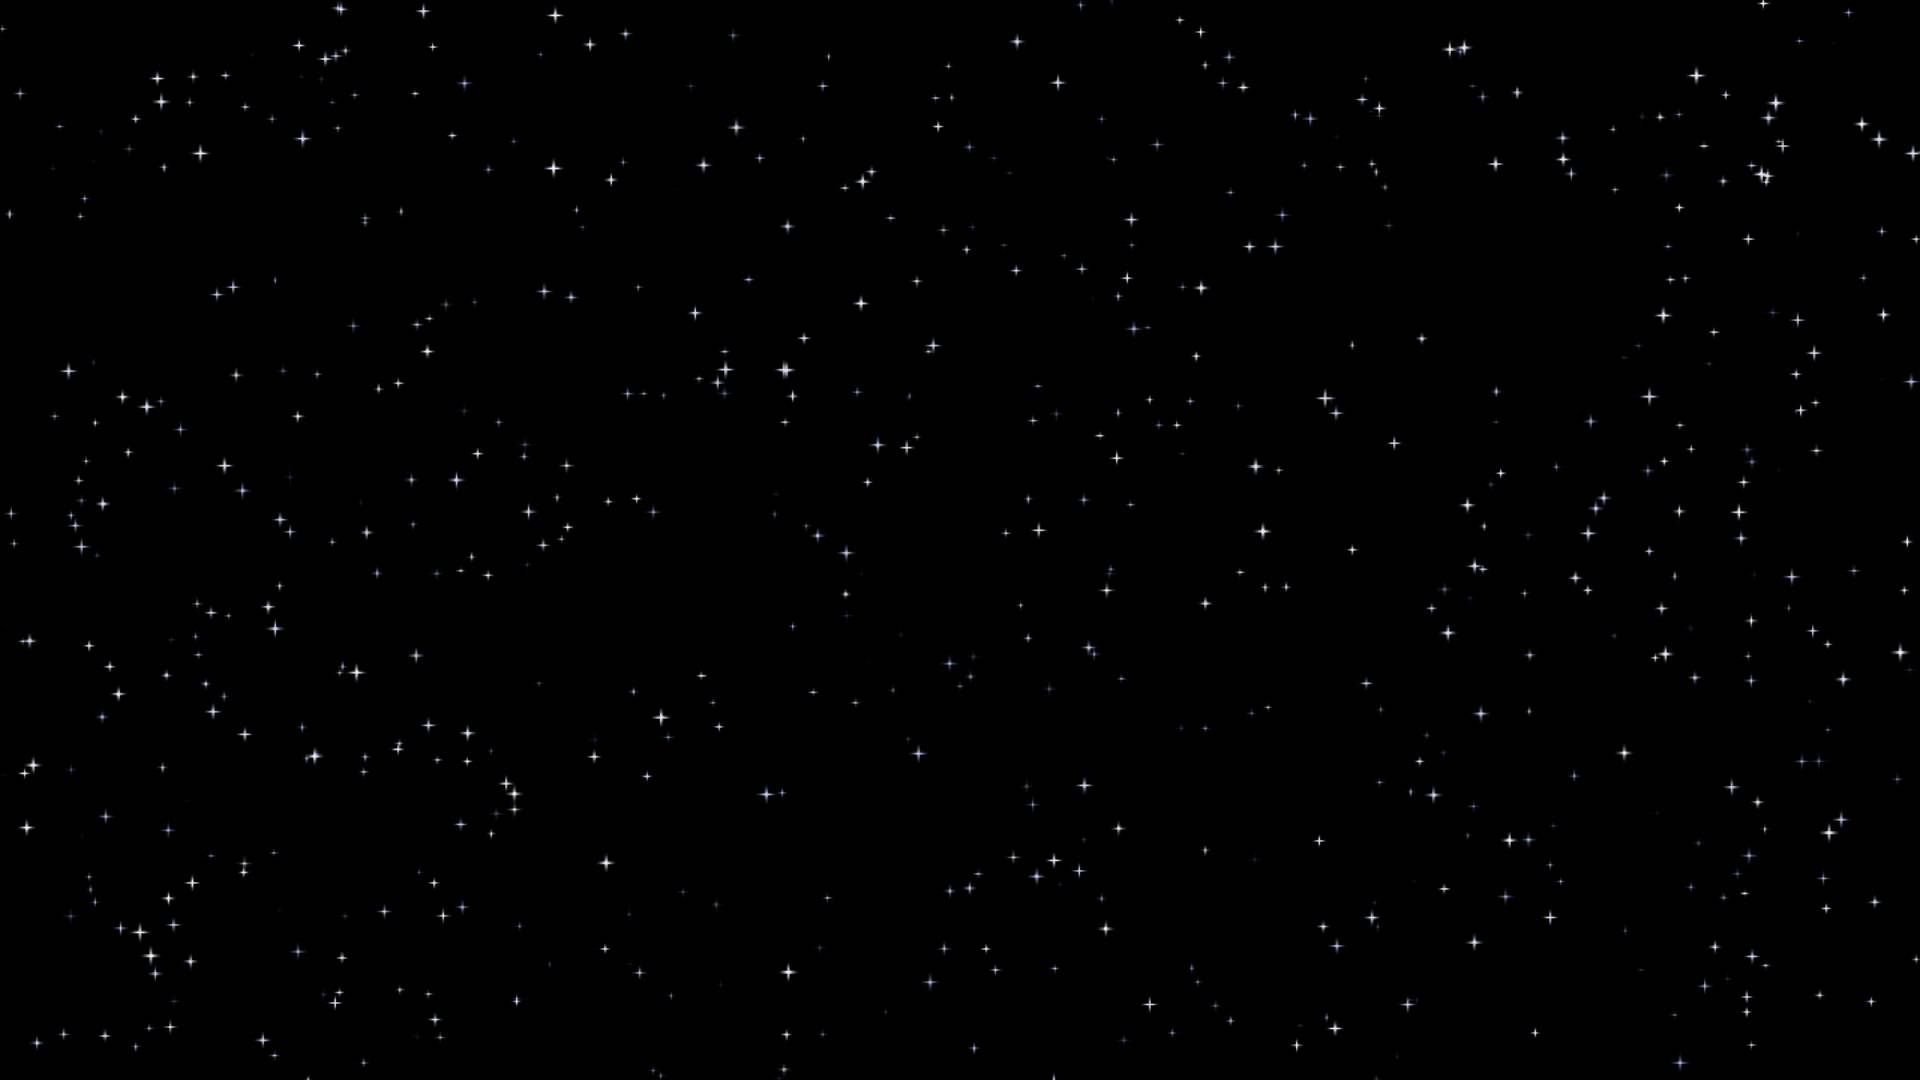 stars overlay. Adobe After Effects Sky / Background. Star overlays, Sky overlays, Overlays